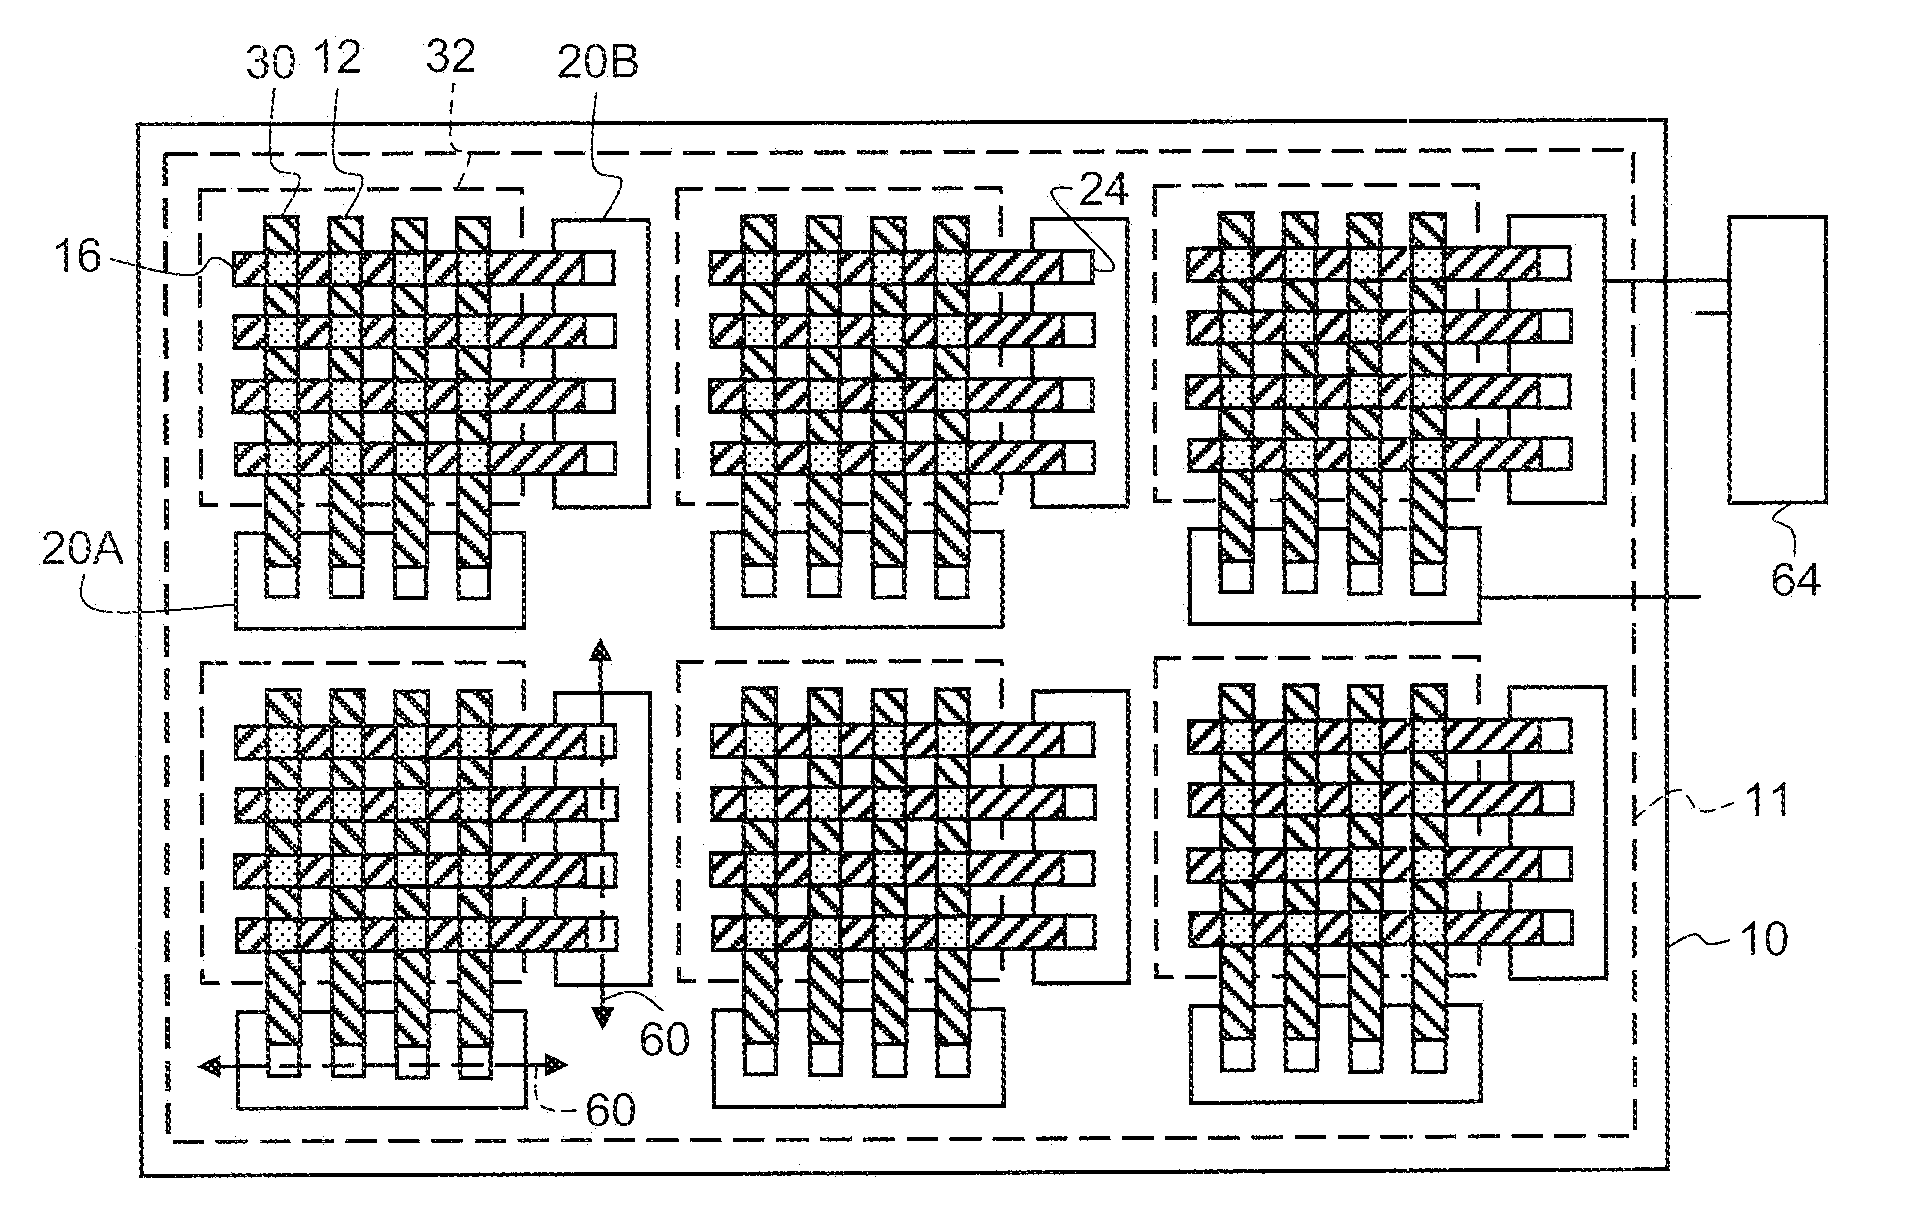 Chiplet display with oriented chiplets and busses